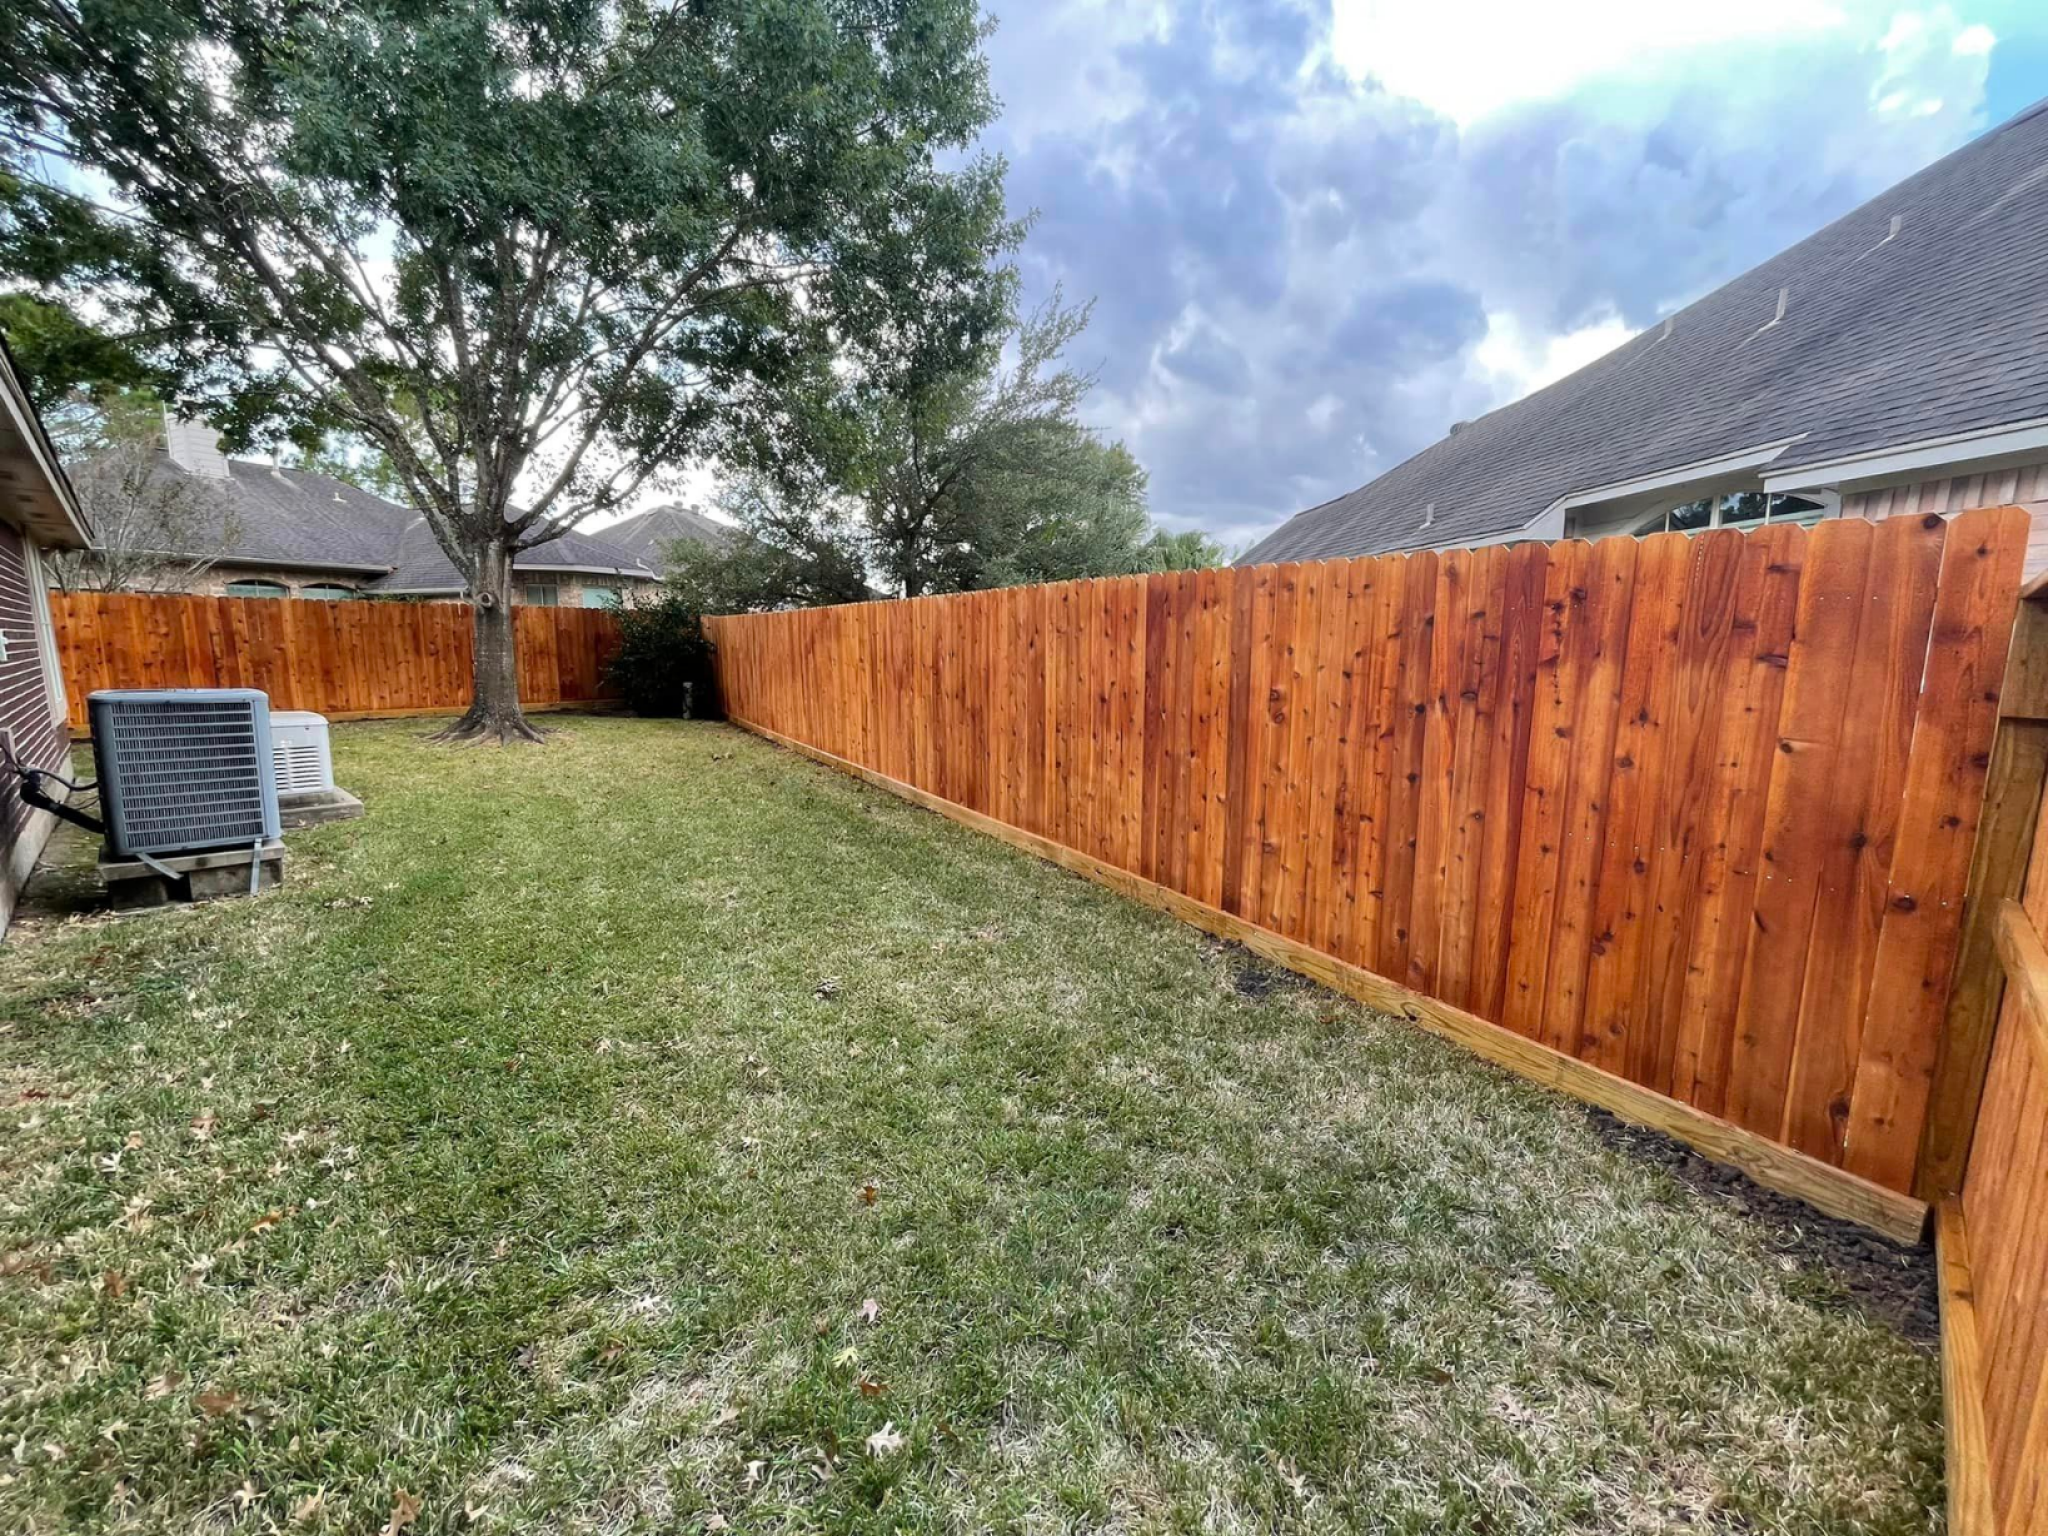 example of a wood fence in Valparaiso Indiana